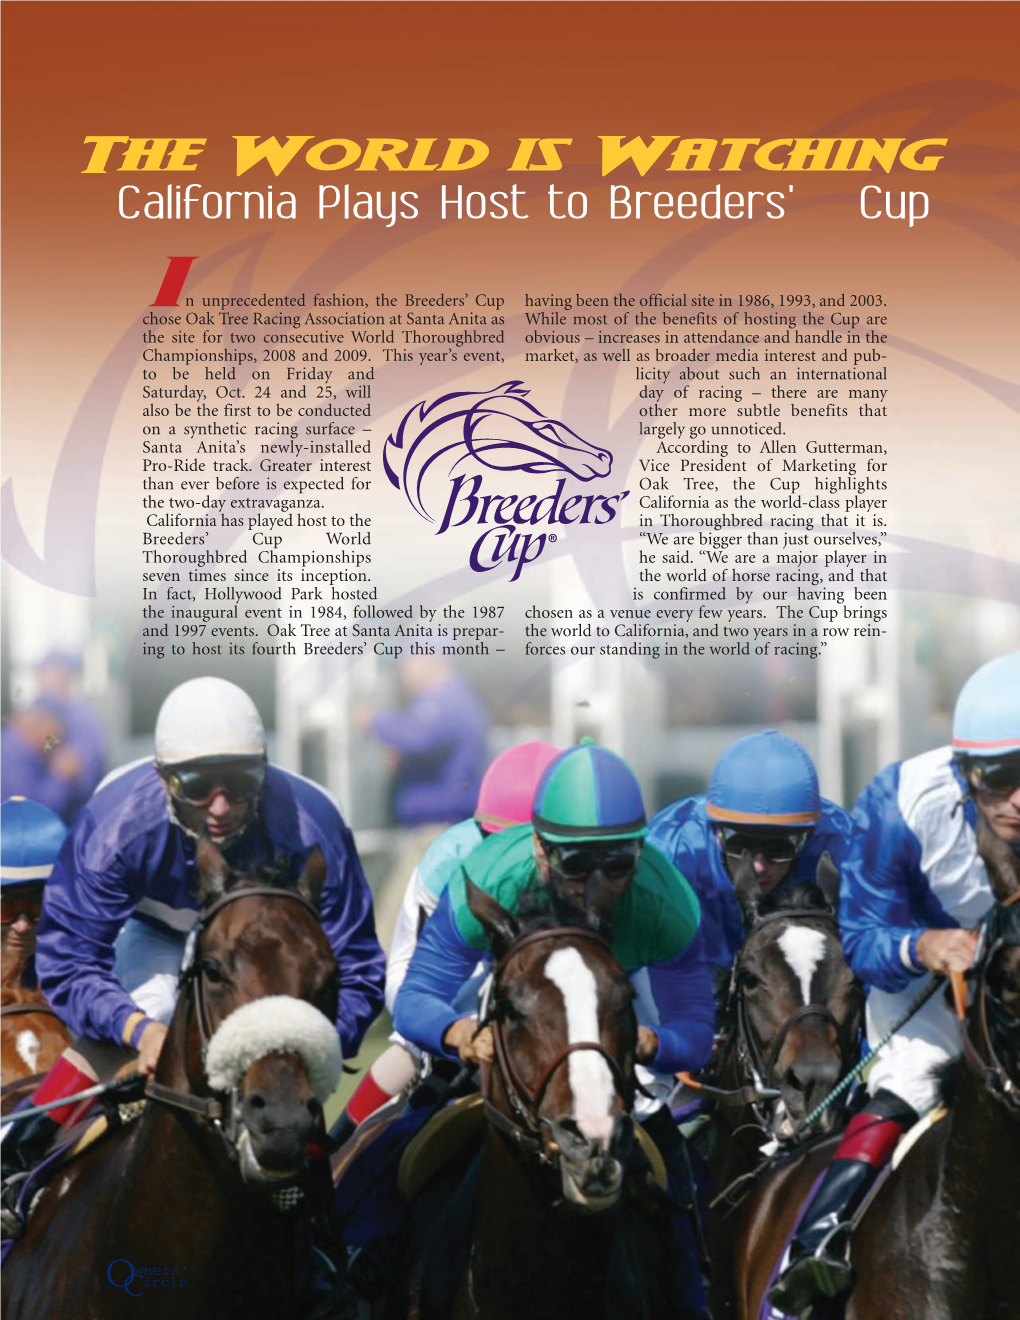 California Plays Host to Breeders'